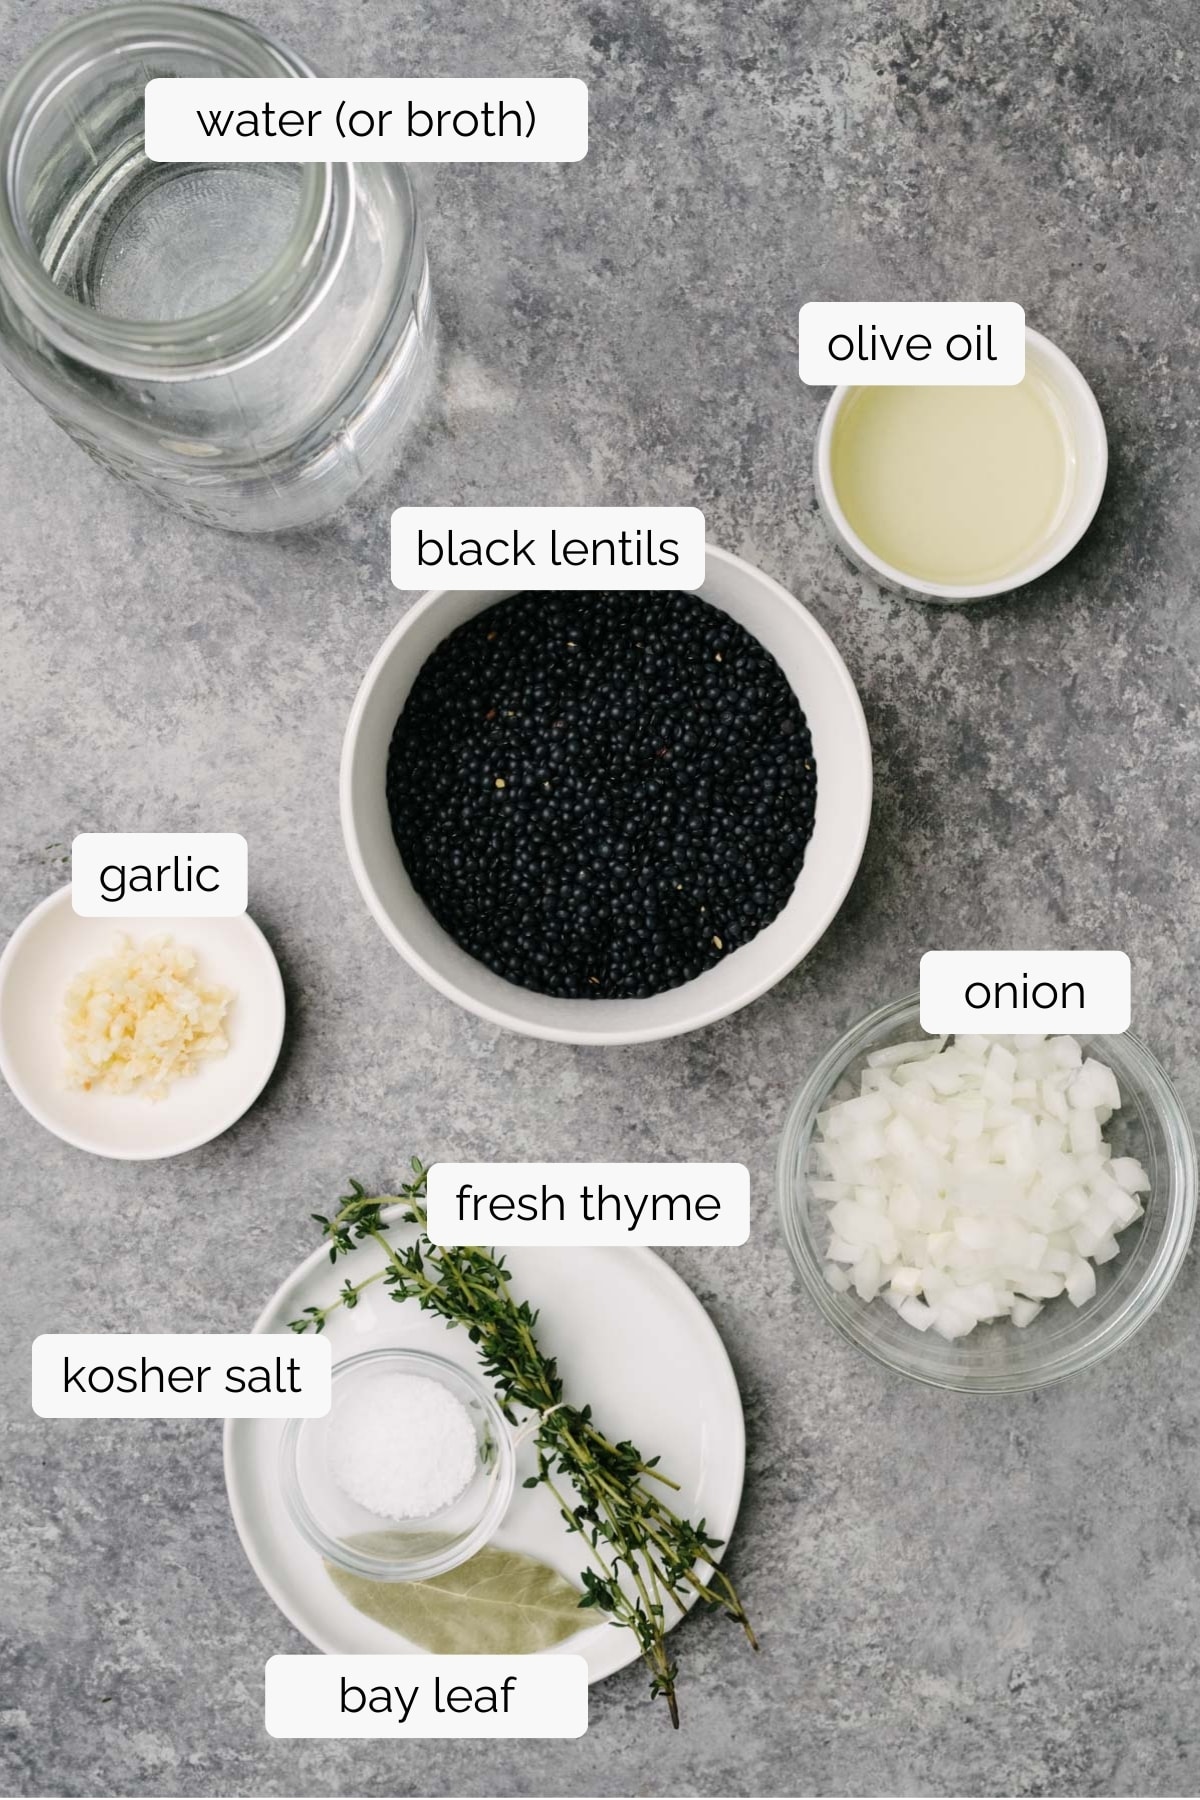 The ingredients to cook black lentils in small bowls arranged on a concrete background - dried lentils, olive oil, onion, garlic, dried lentils, water, thyme, bay leaf, and salt.